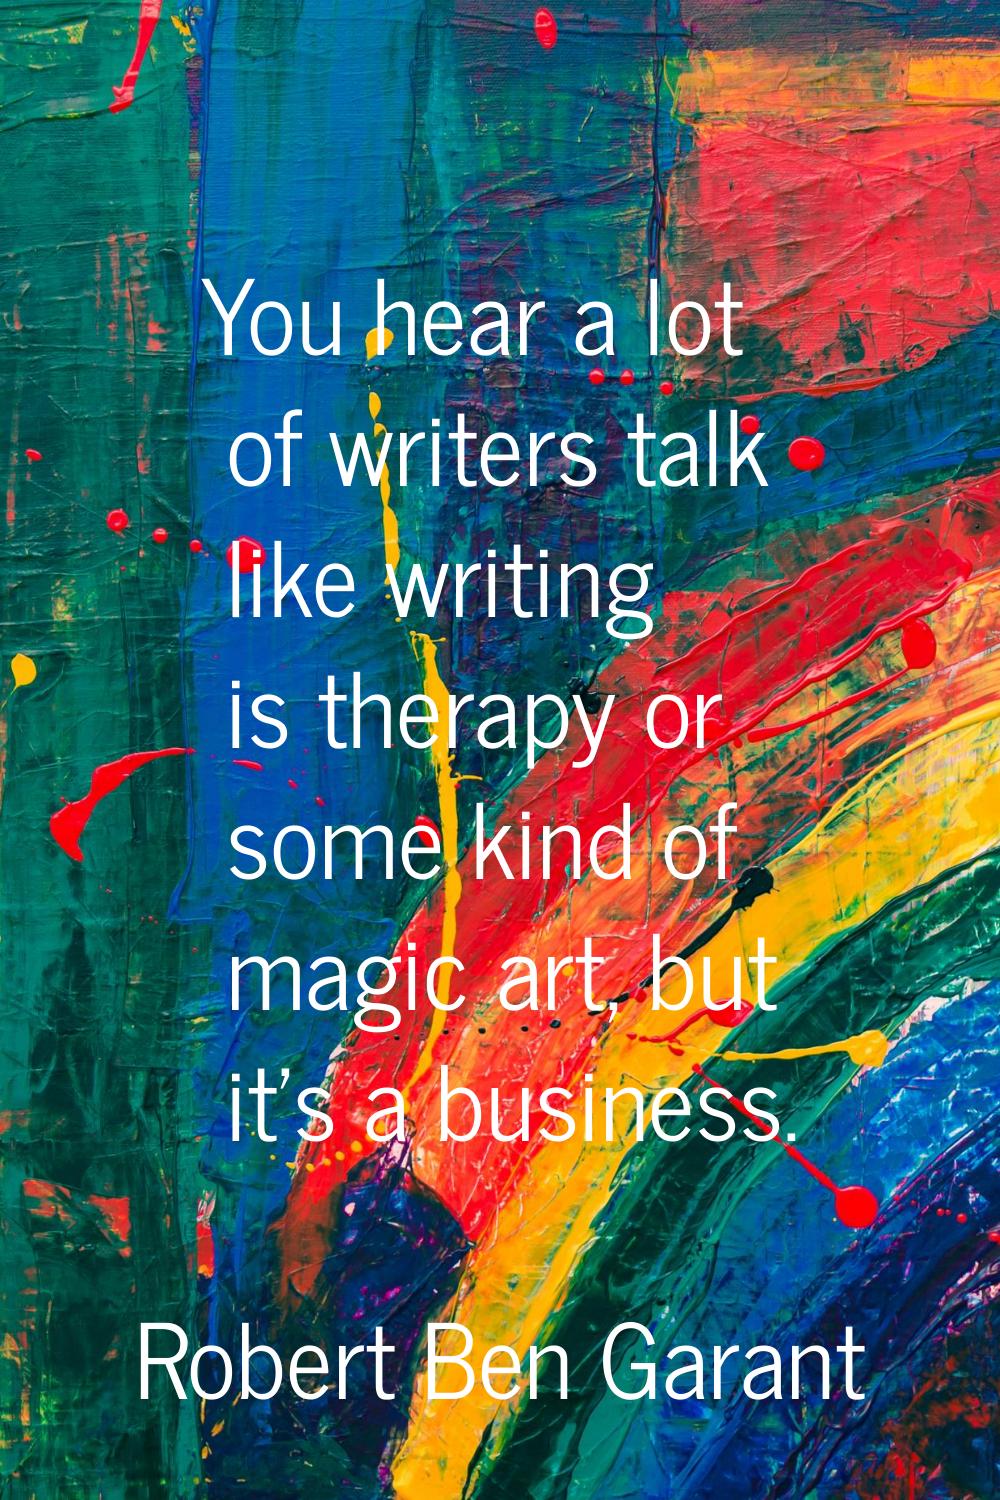 You hear a lot of writers talk like writing is therapy or some kind of magic art, but it's a busine